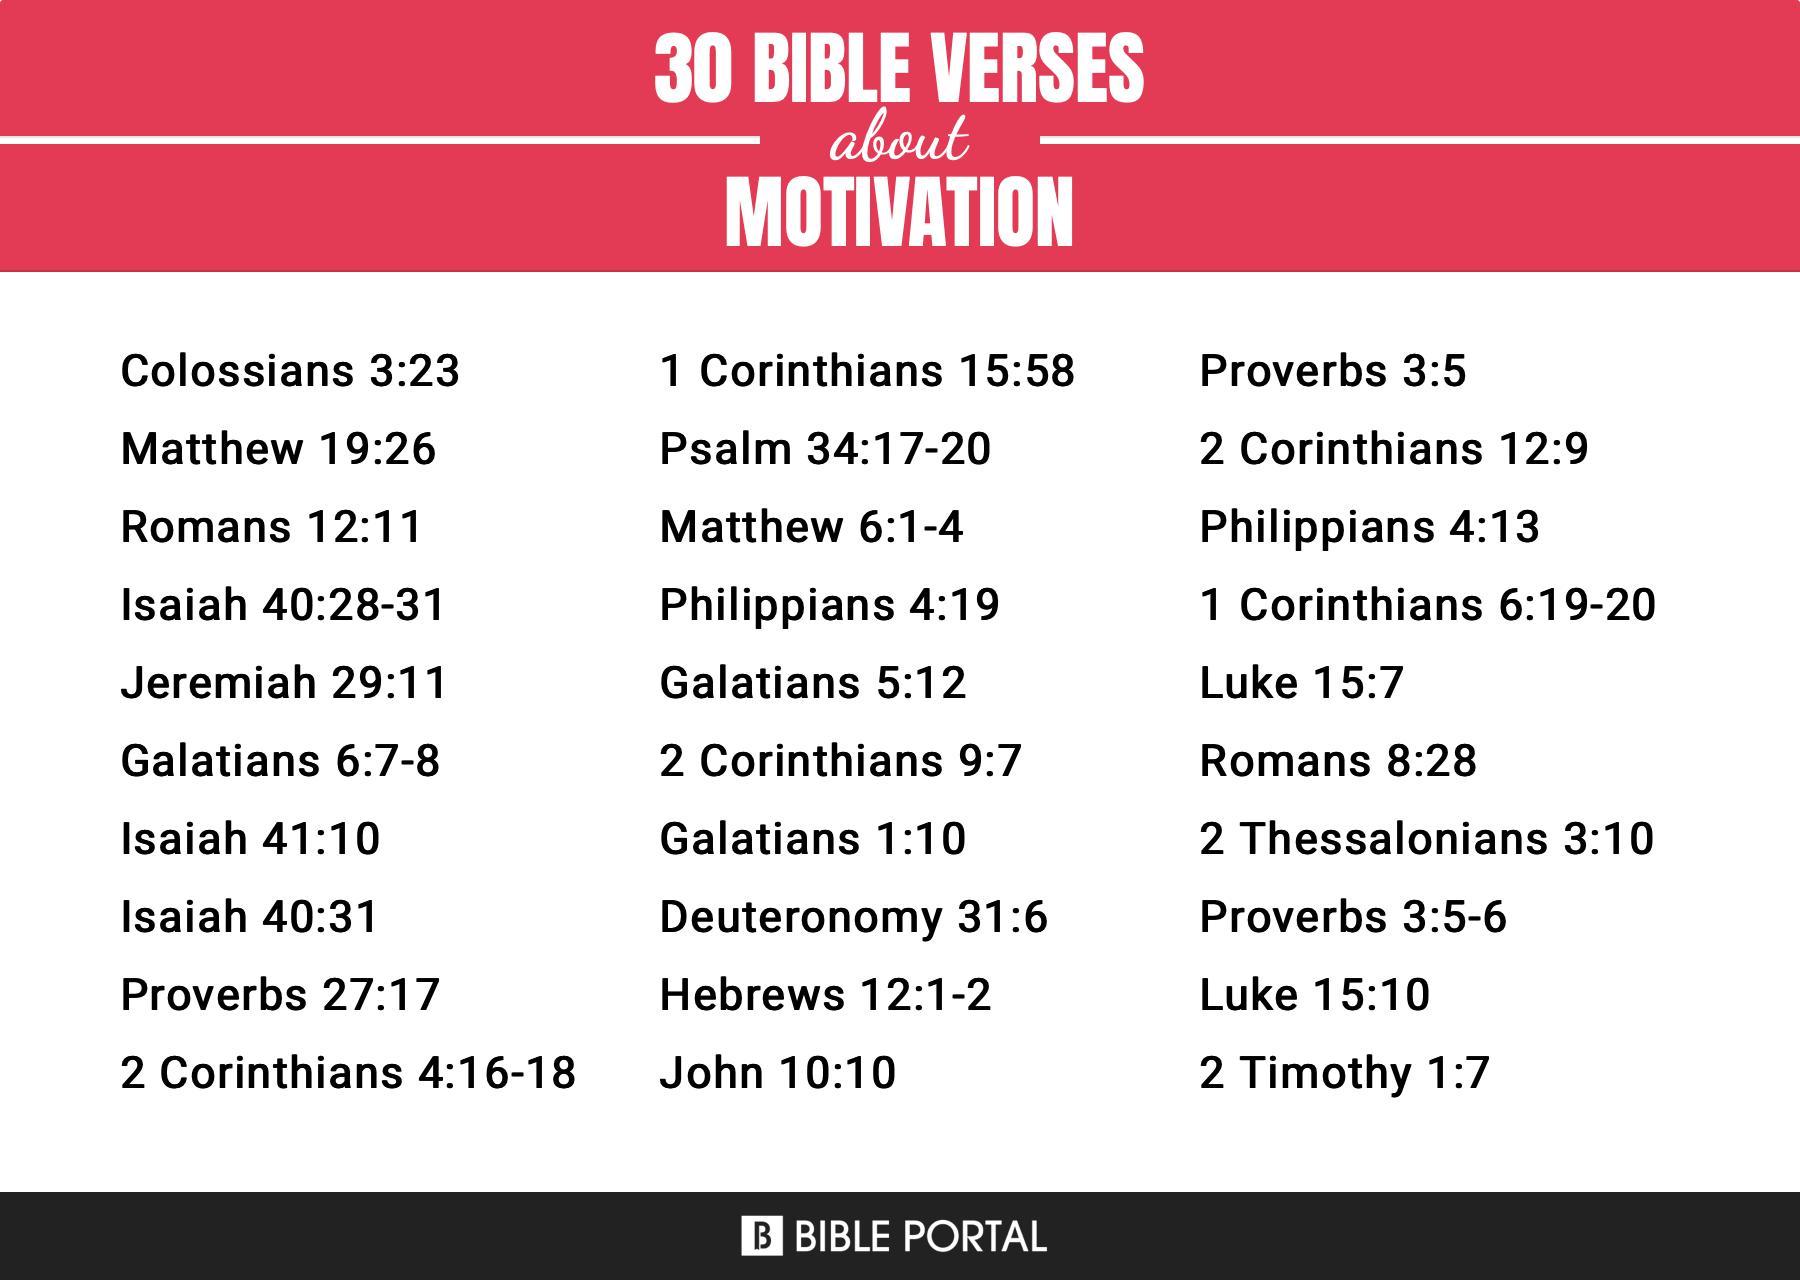 What Does the Bible Say about Motivation?